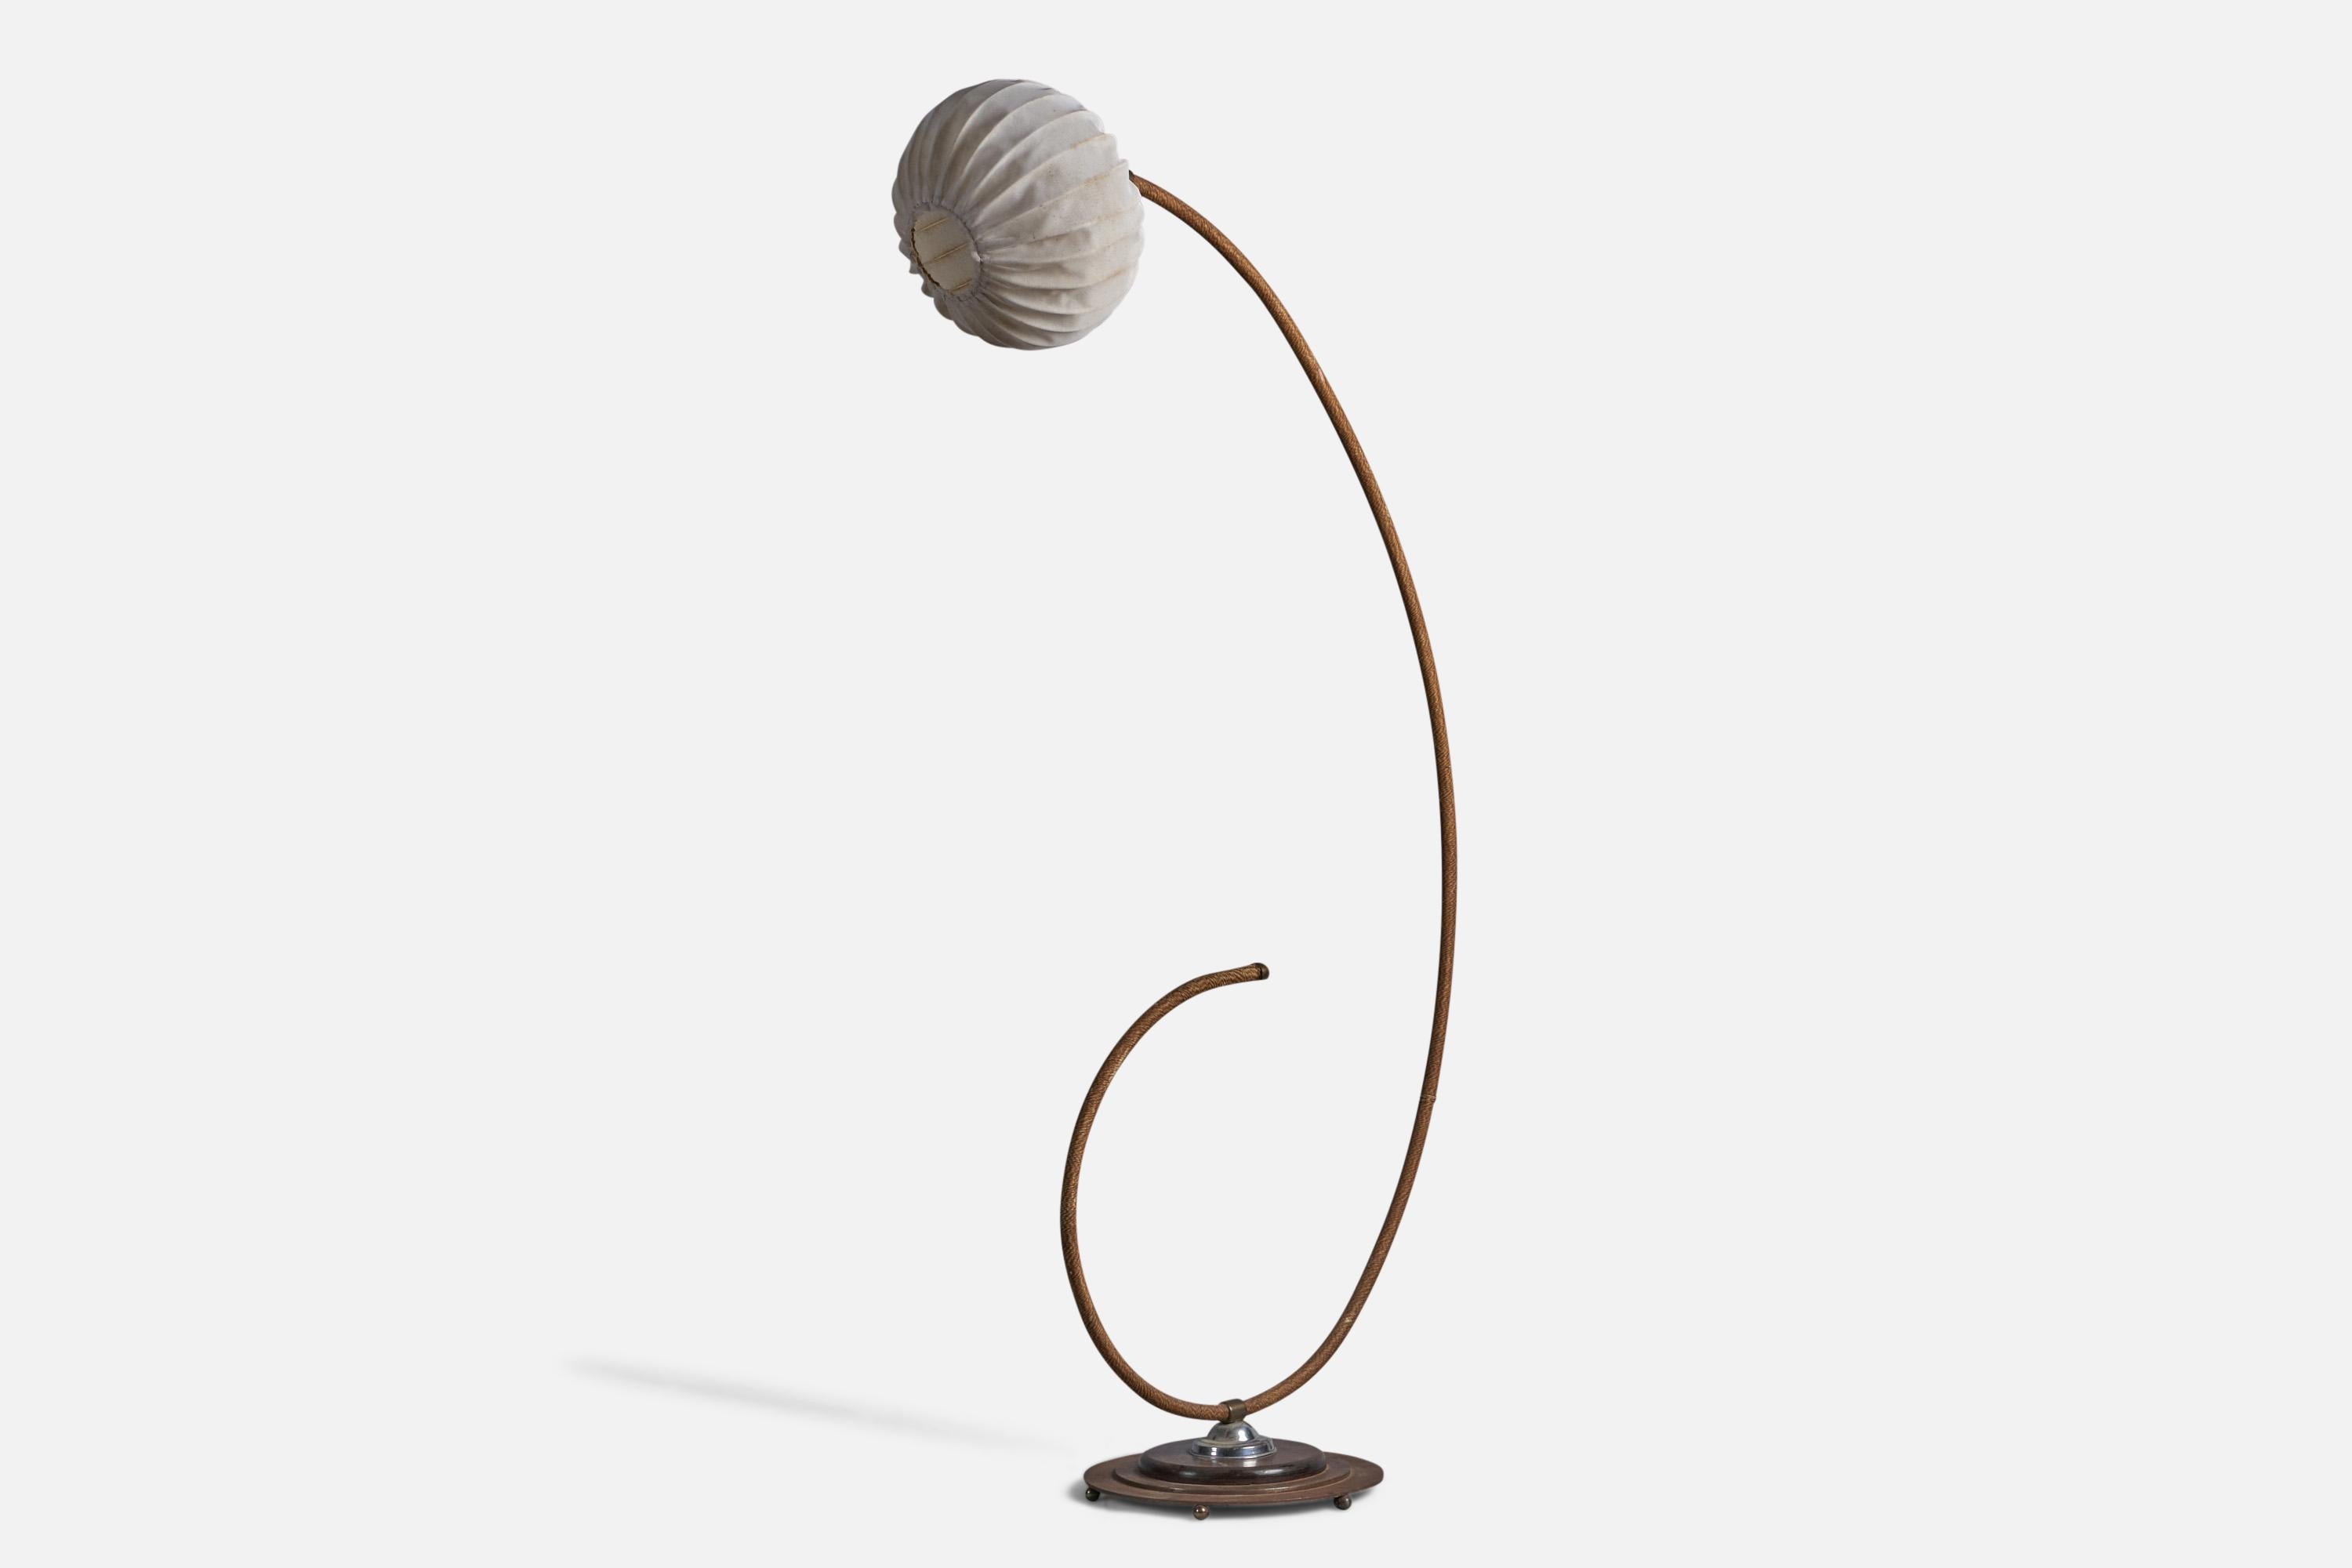 A curved cord, wood, metal, fabric floor lamp, designed and produced in Sweden, 1950s.

Overall Dimensions (inches): 68.5